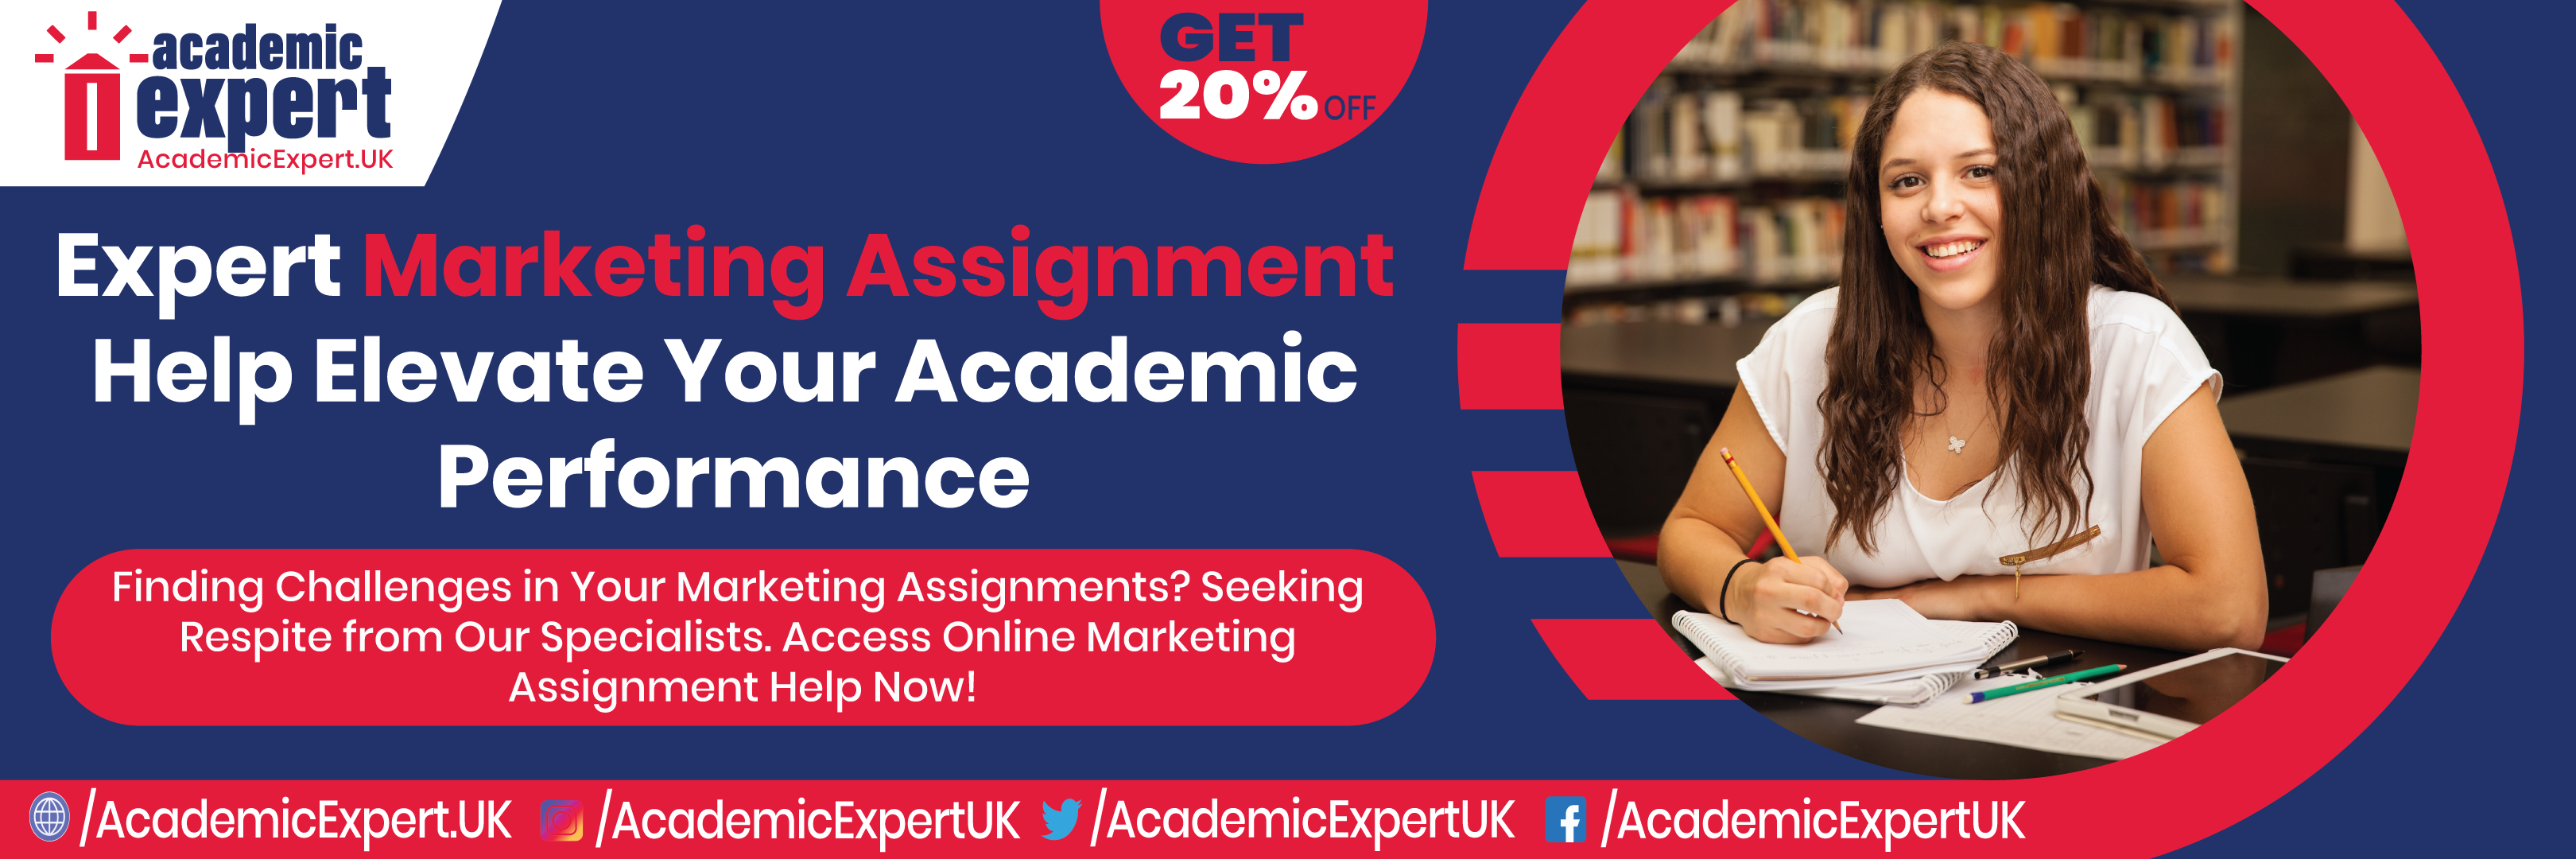 Expert Marketing Assignment Help Elevate Your Academic Performance